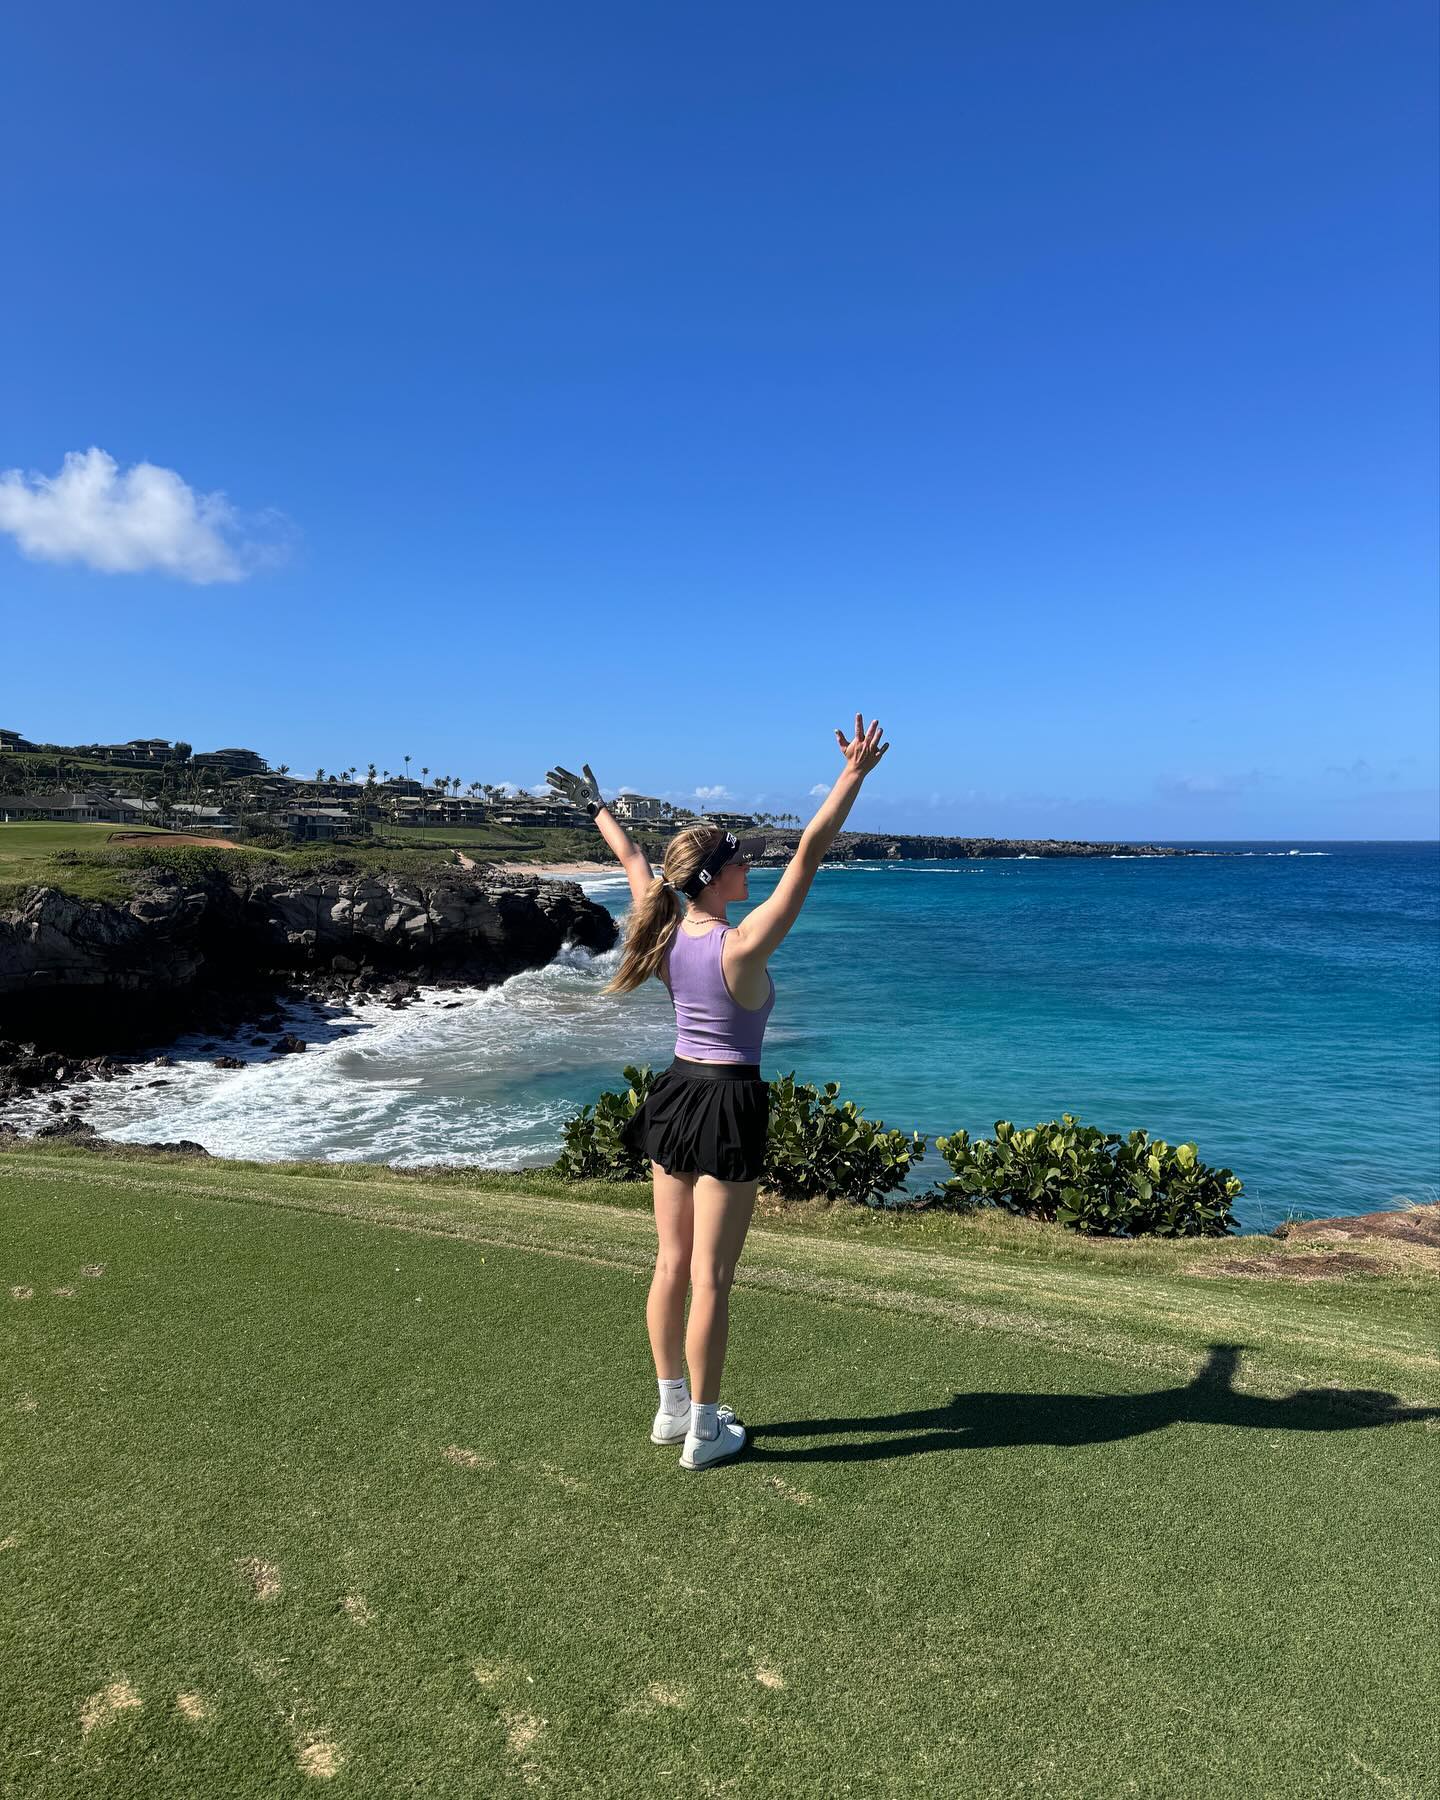 The 20-year-old was seen playing on a Hawaii golf course and showed off her skills in the sport